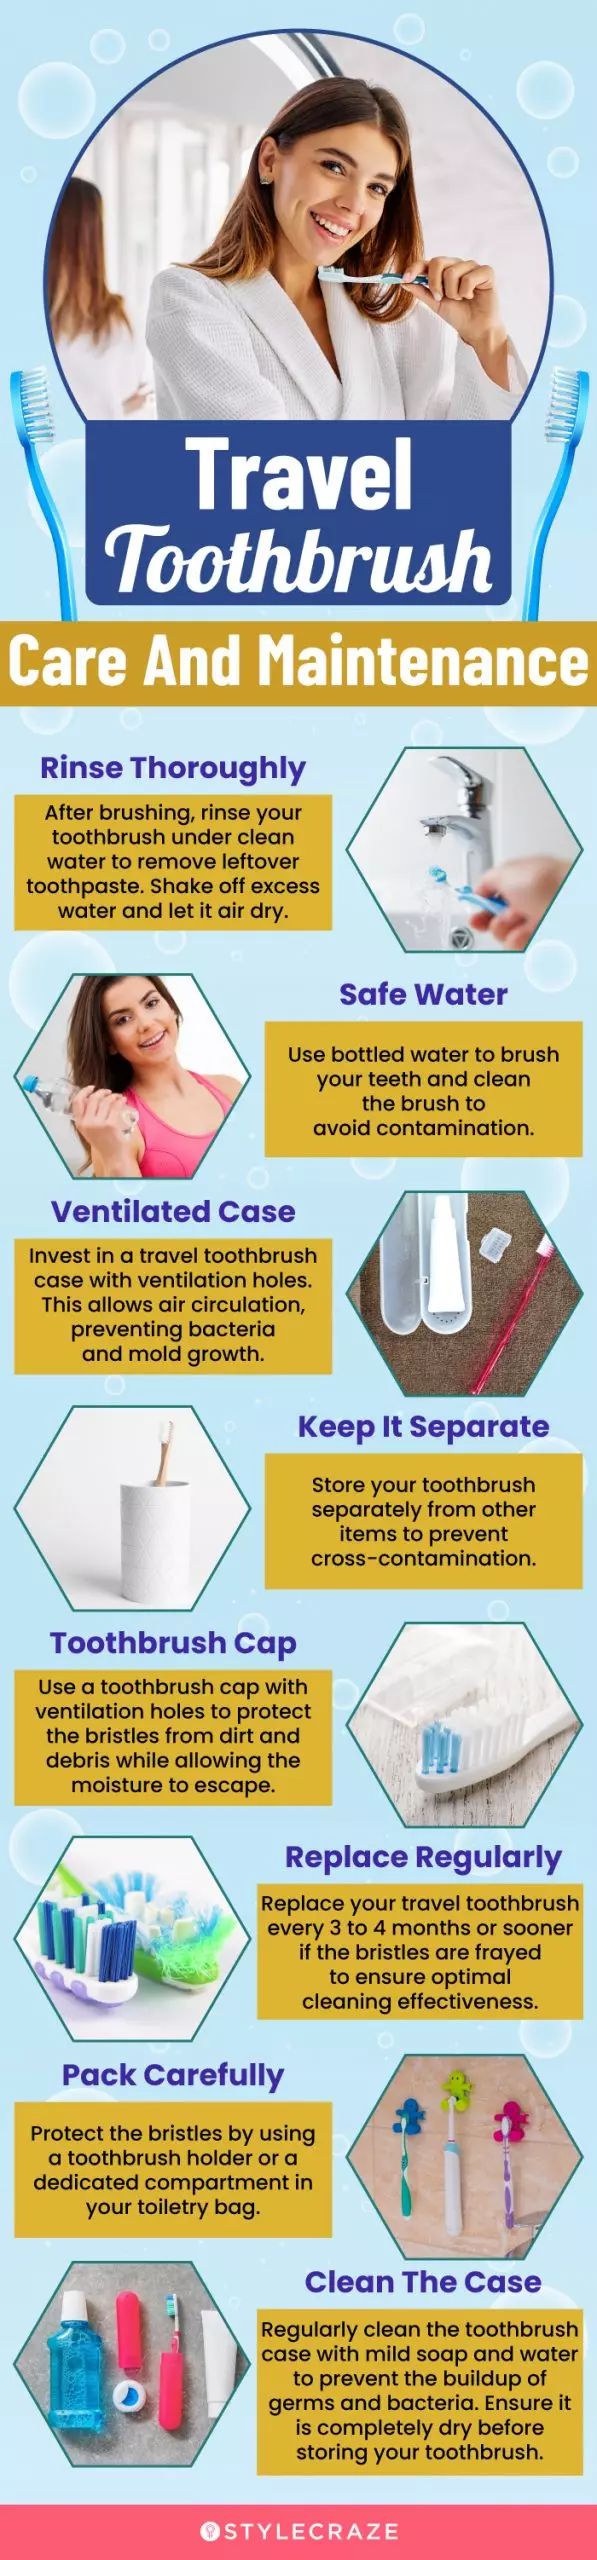 Travel Toothbrush Care And Maintenance (infographic)